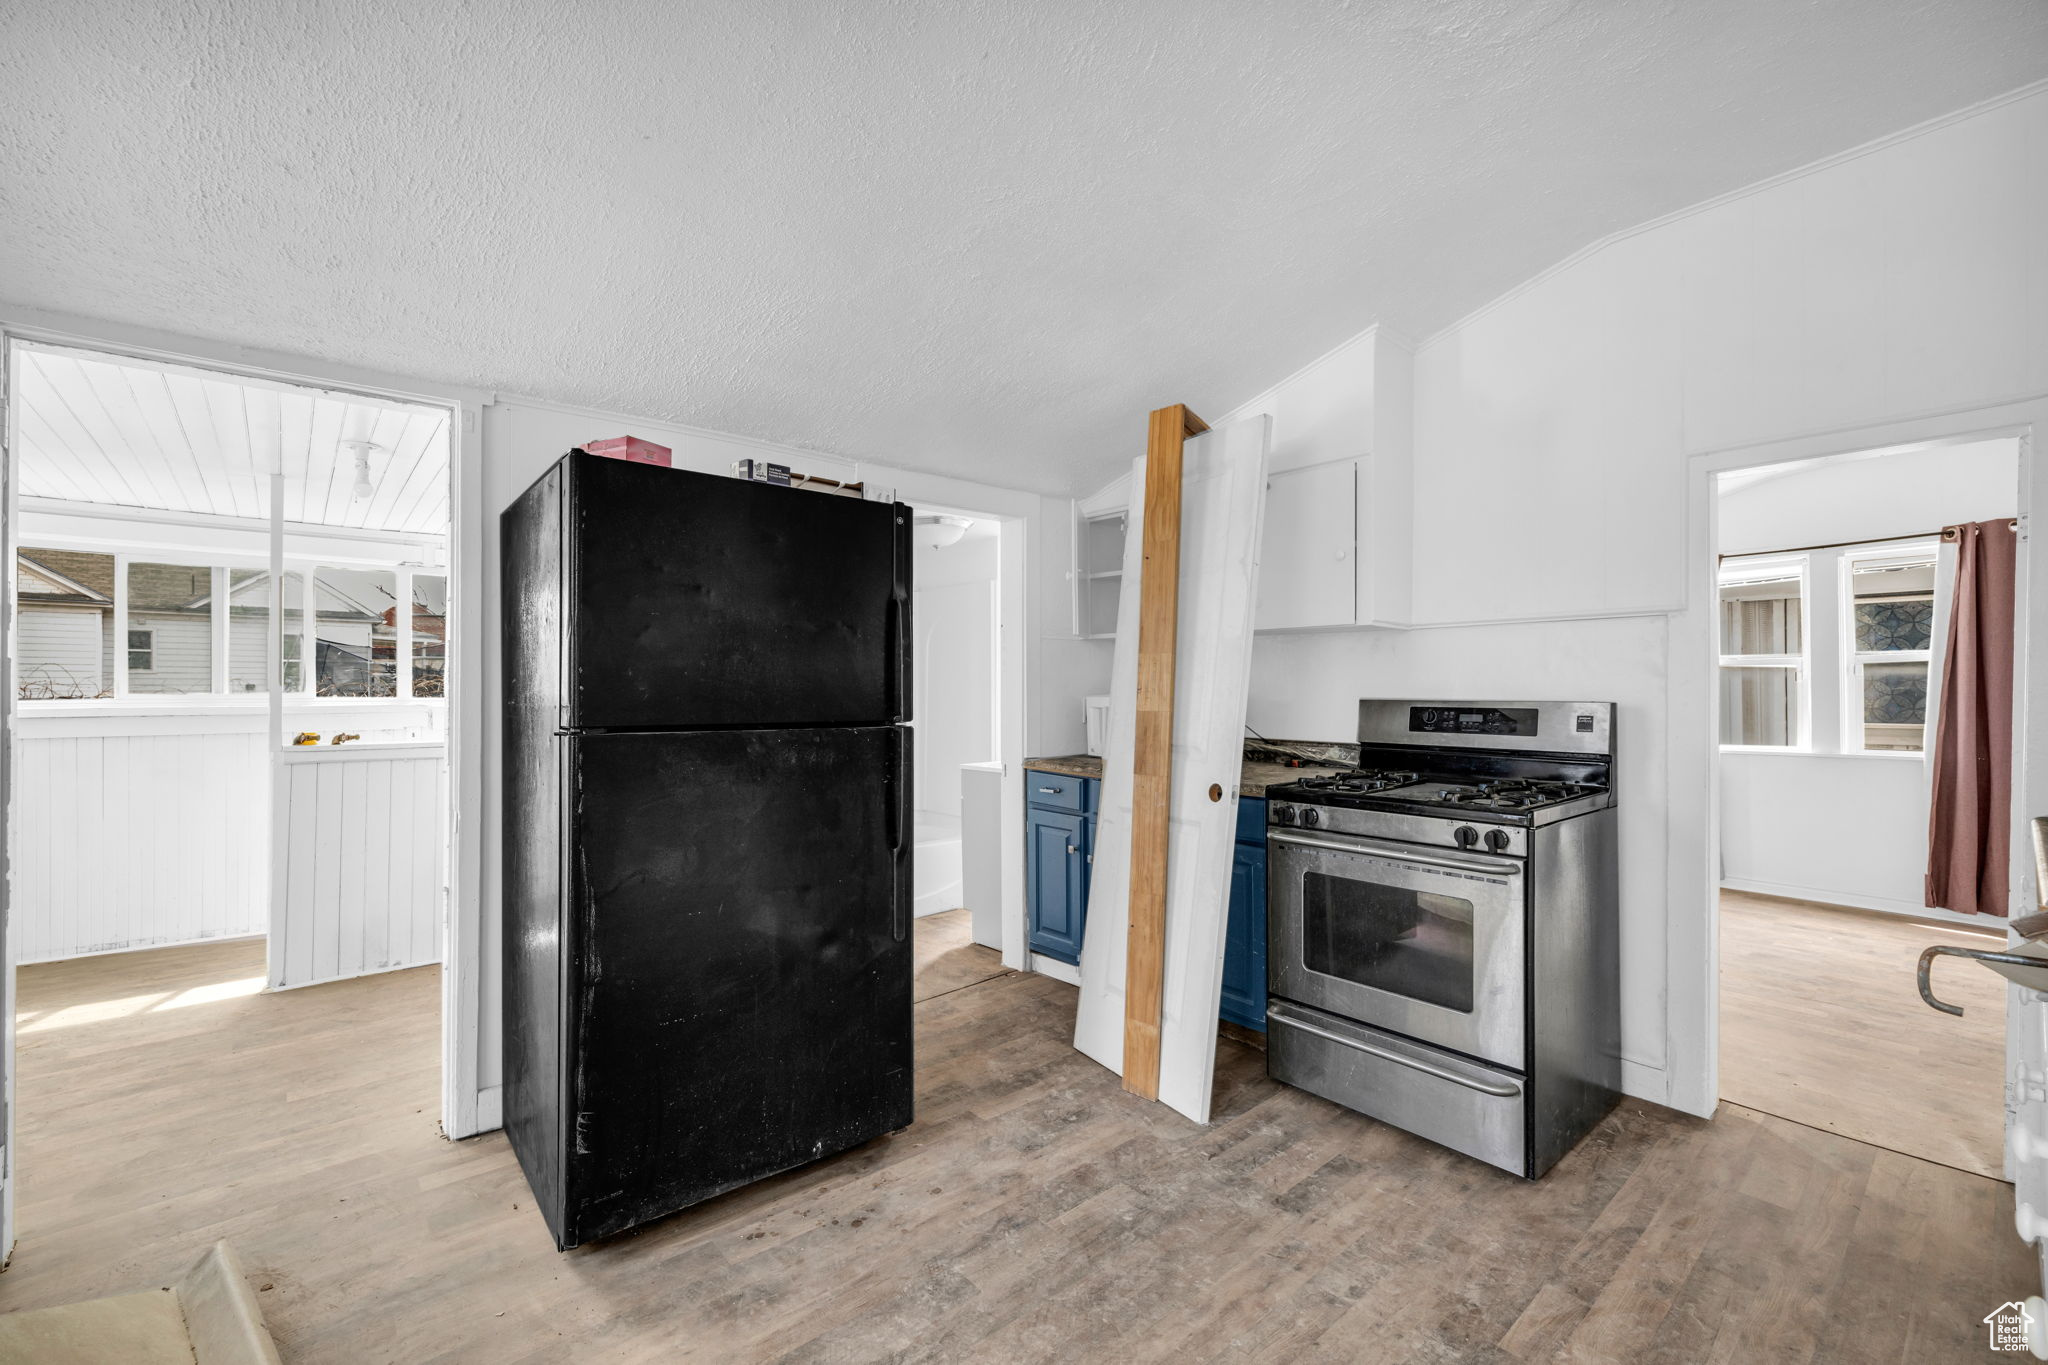 Kitchen with light wood-type flooring, black refrigerator, a wealth of natural light, gas stove, and white cabinets